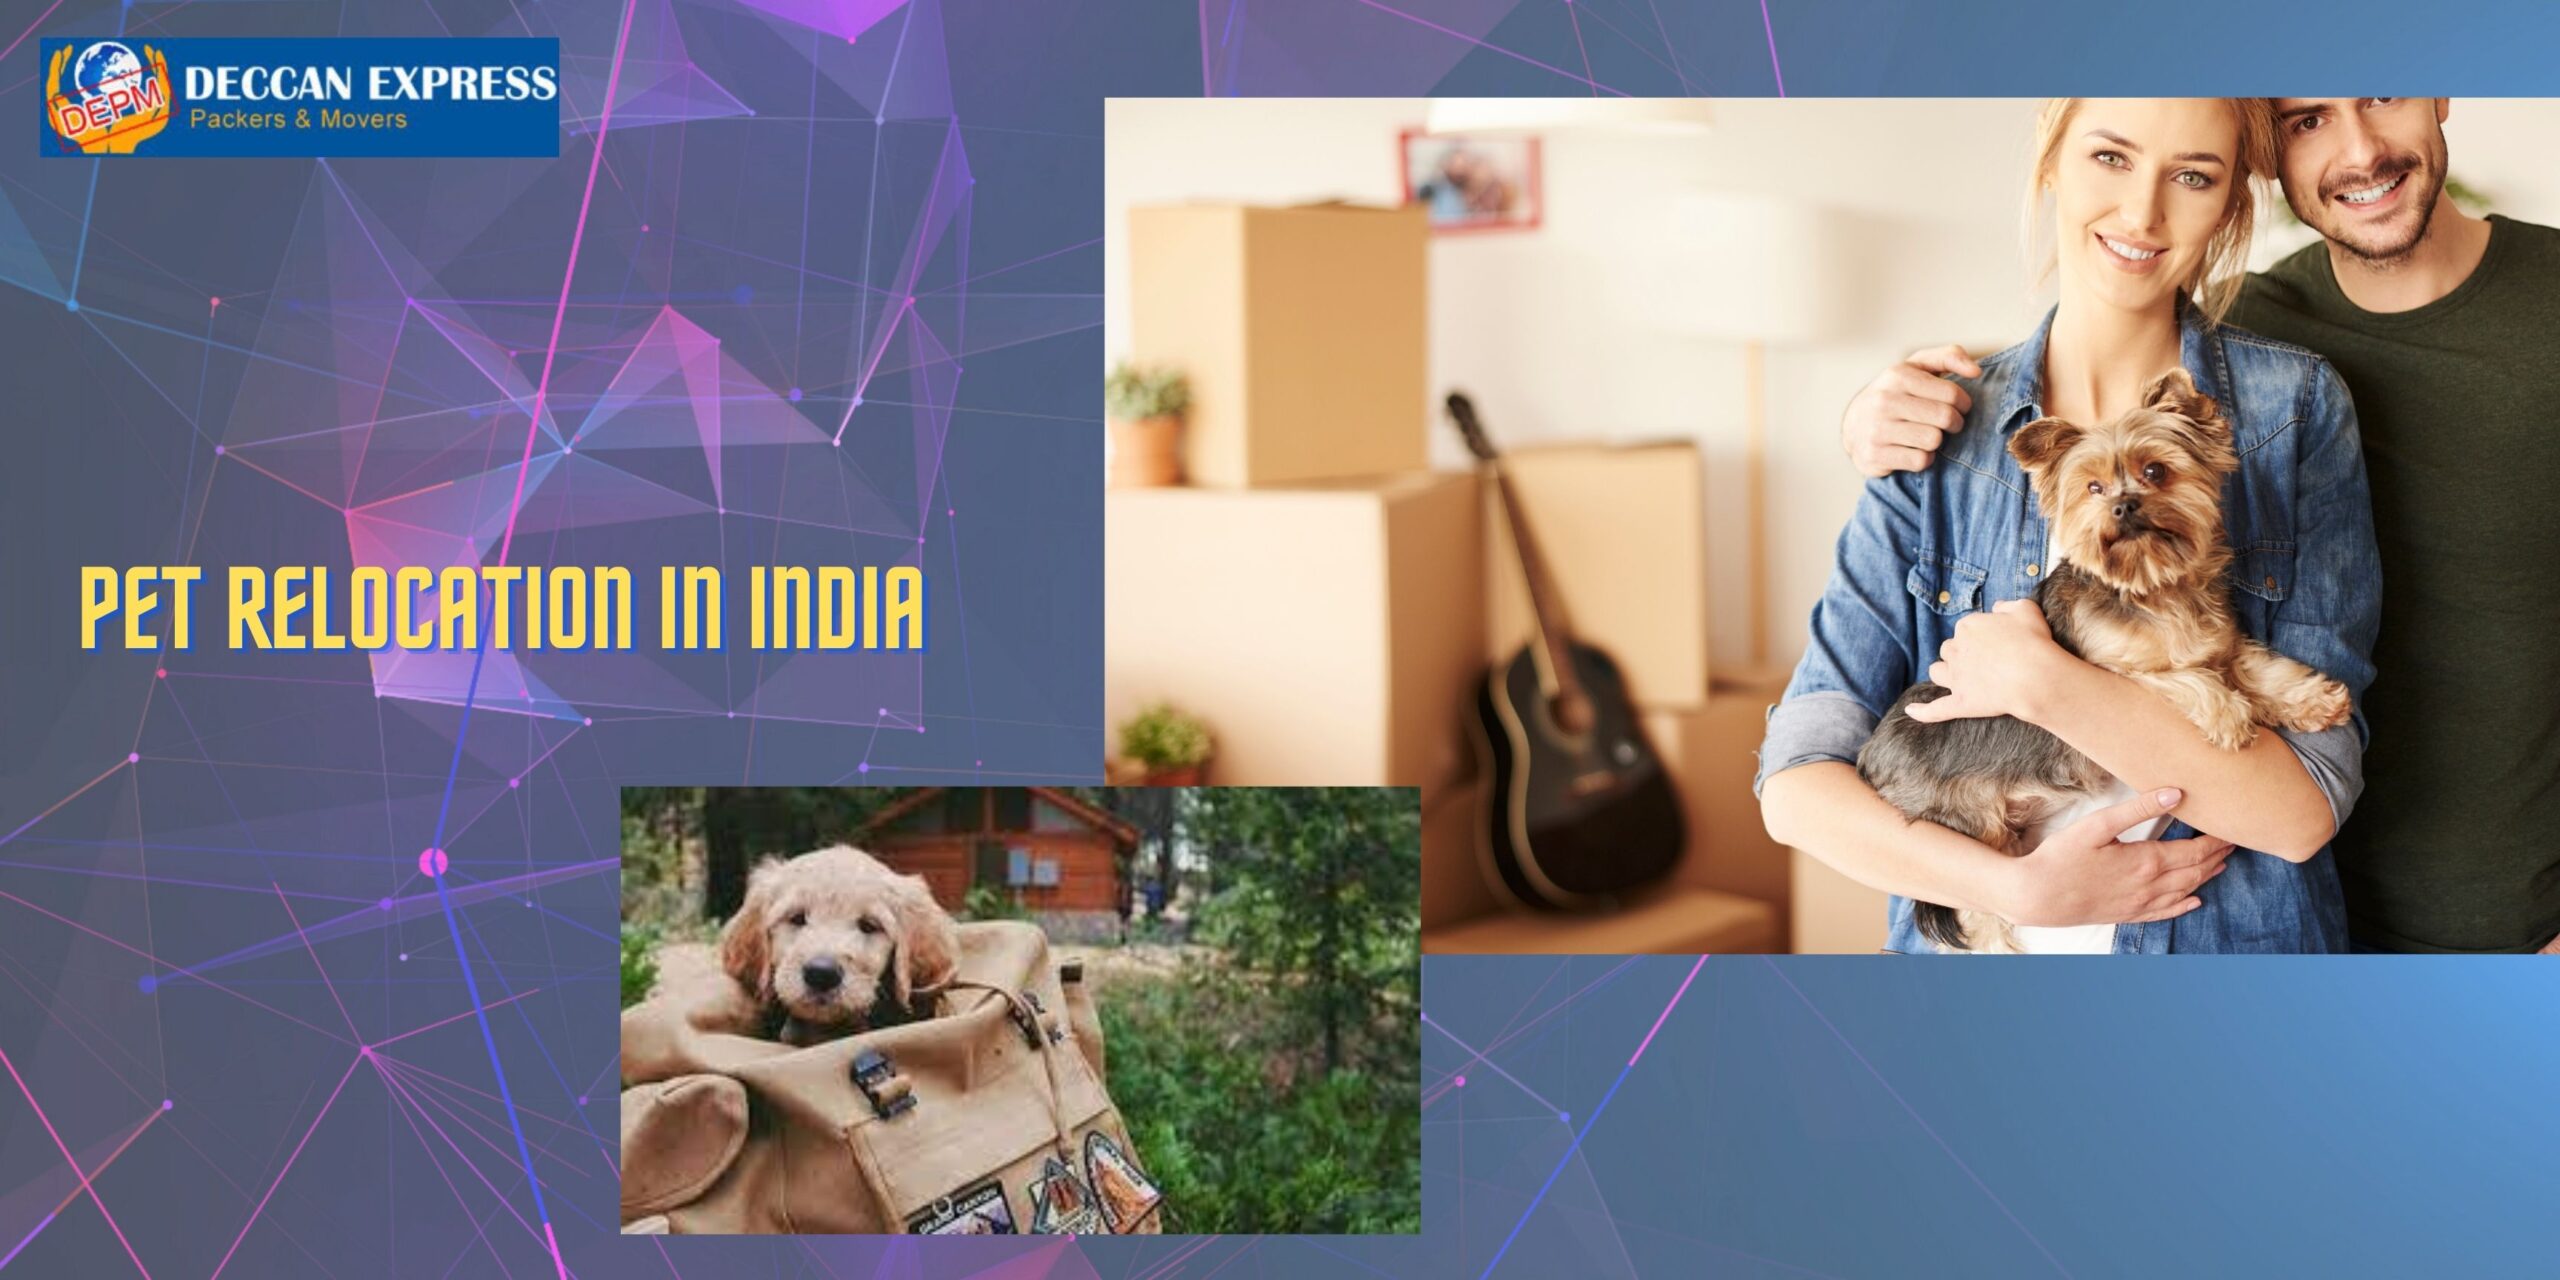 PET RELOCATION IN INDIA: USEFUL TIPS & TRICKS FOR MOVING WITH PETS